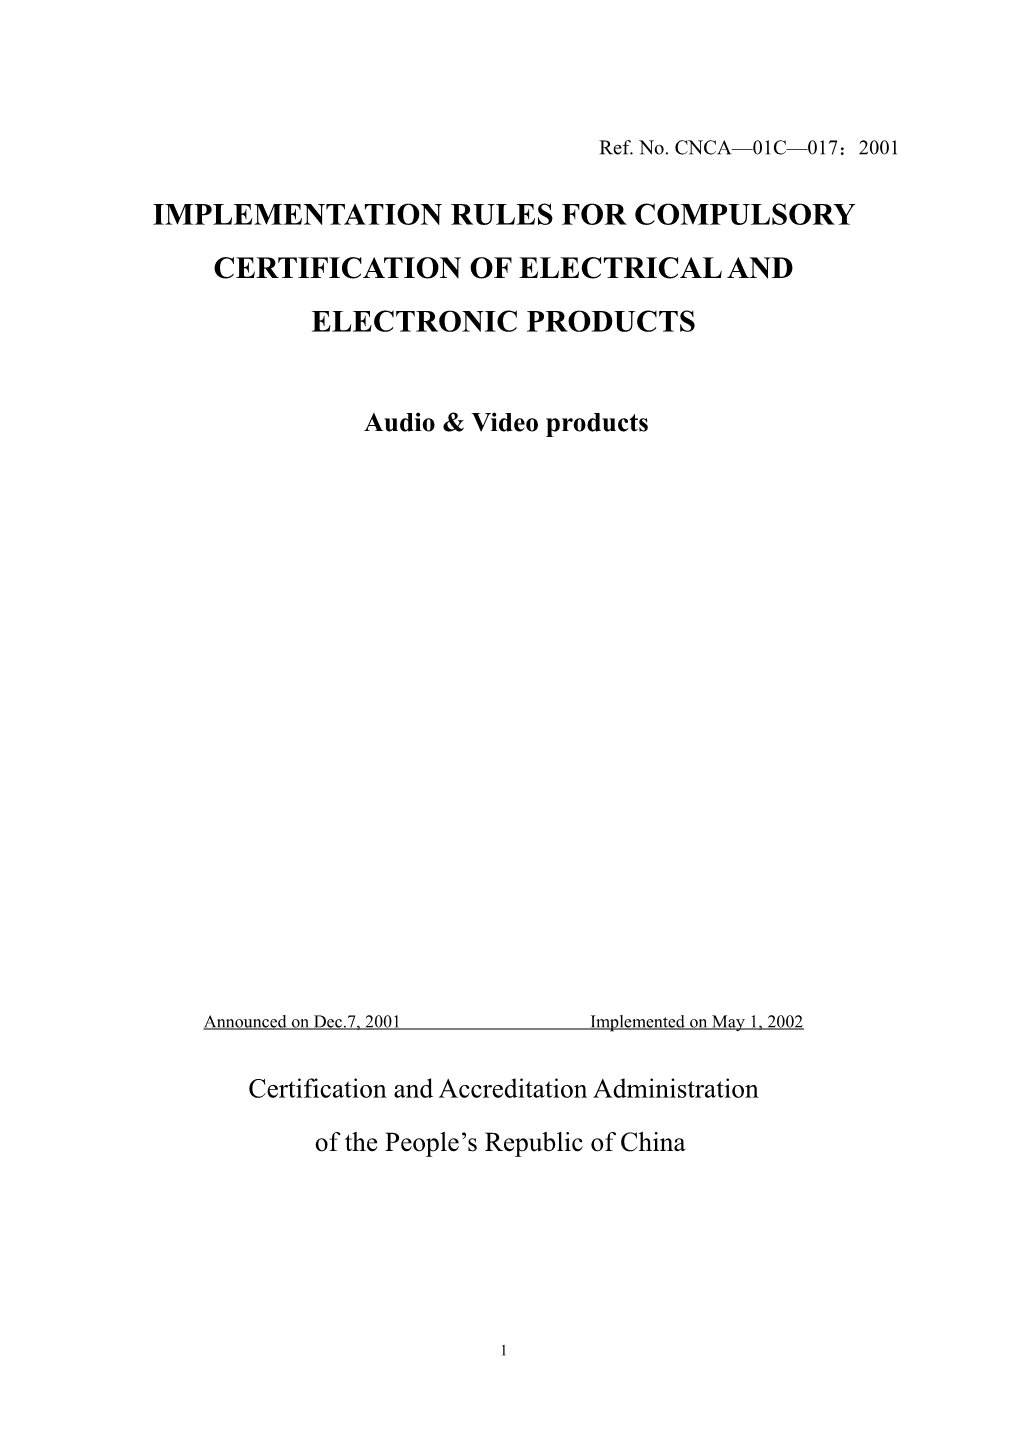 Implementation Rules for Compulsory Certification of Electrical and Electronic Products